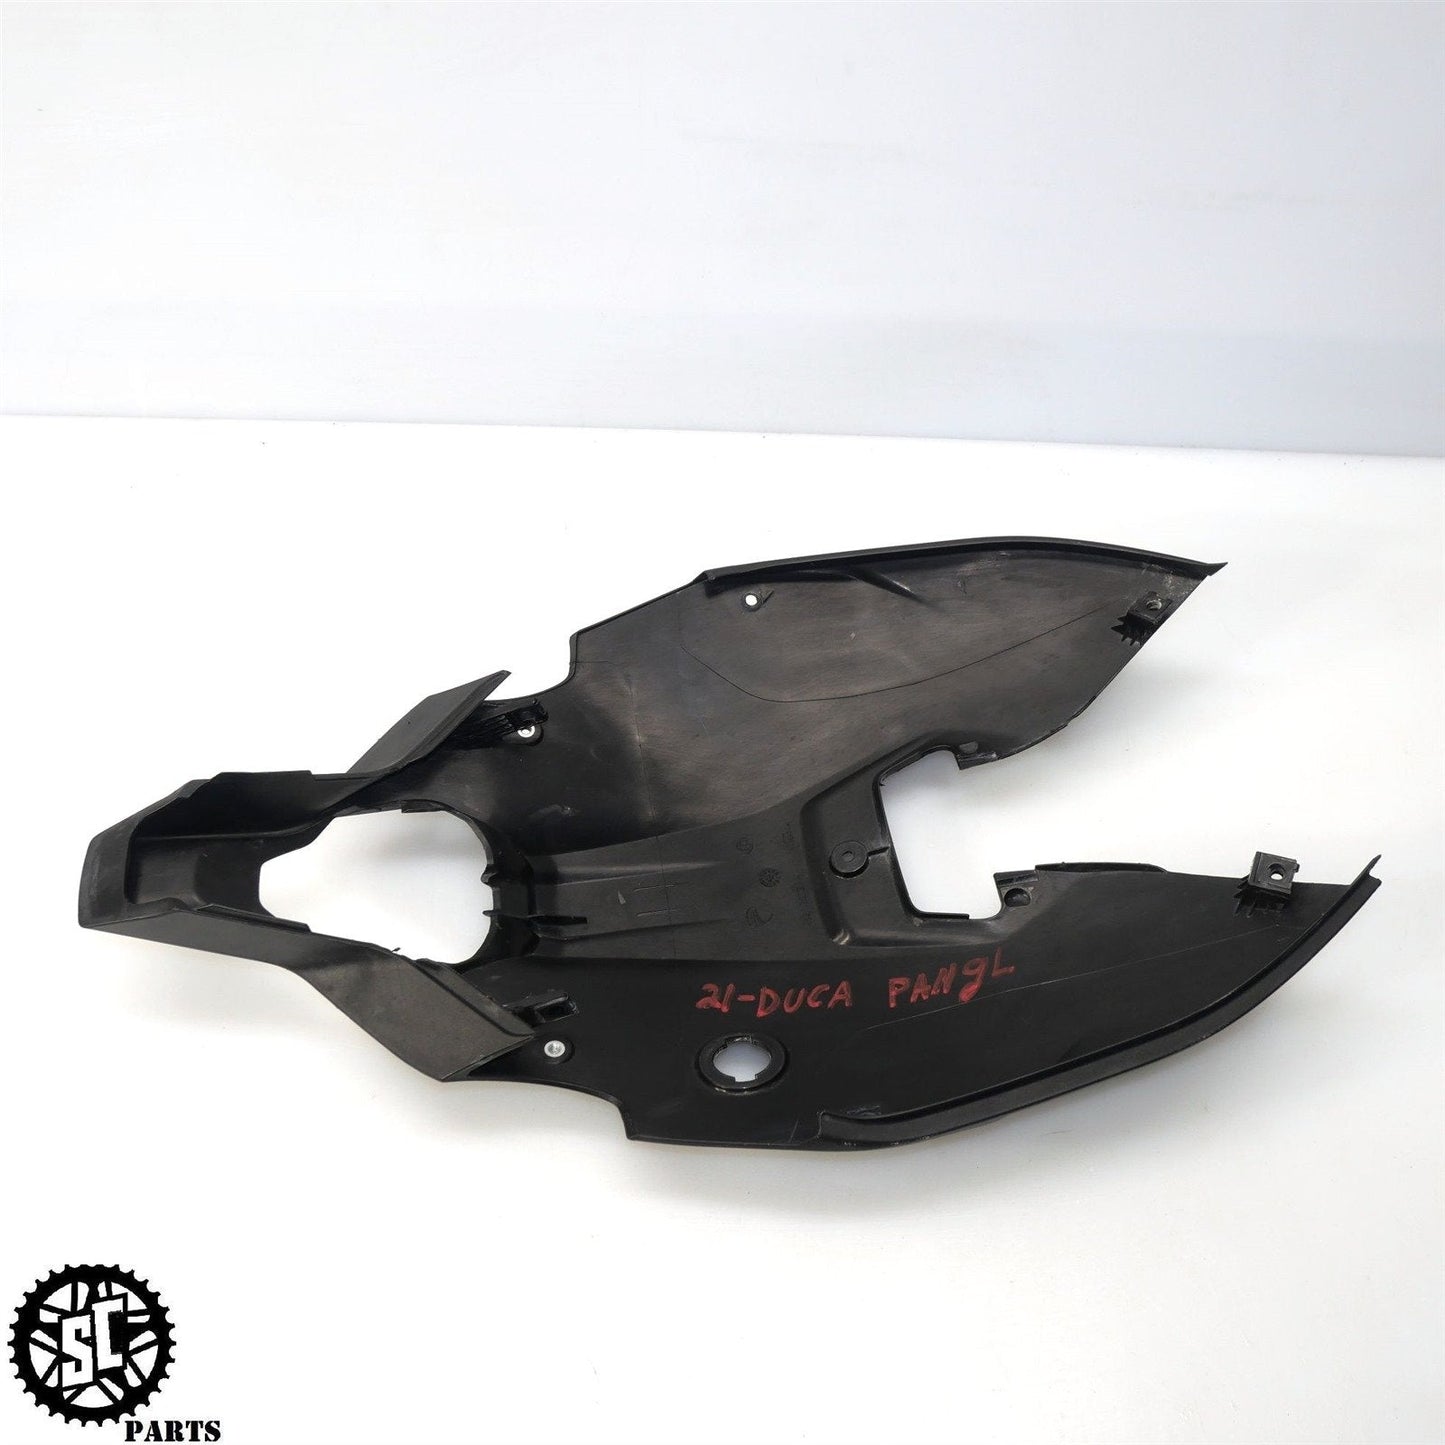 2020-2022 DUCATI PANIGALE V2 REAR UNDER TAIL FAIRING COVER D05